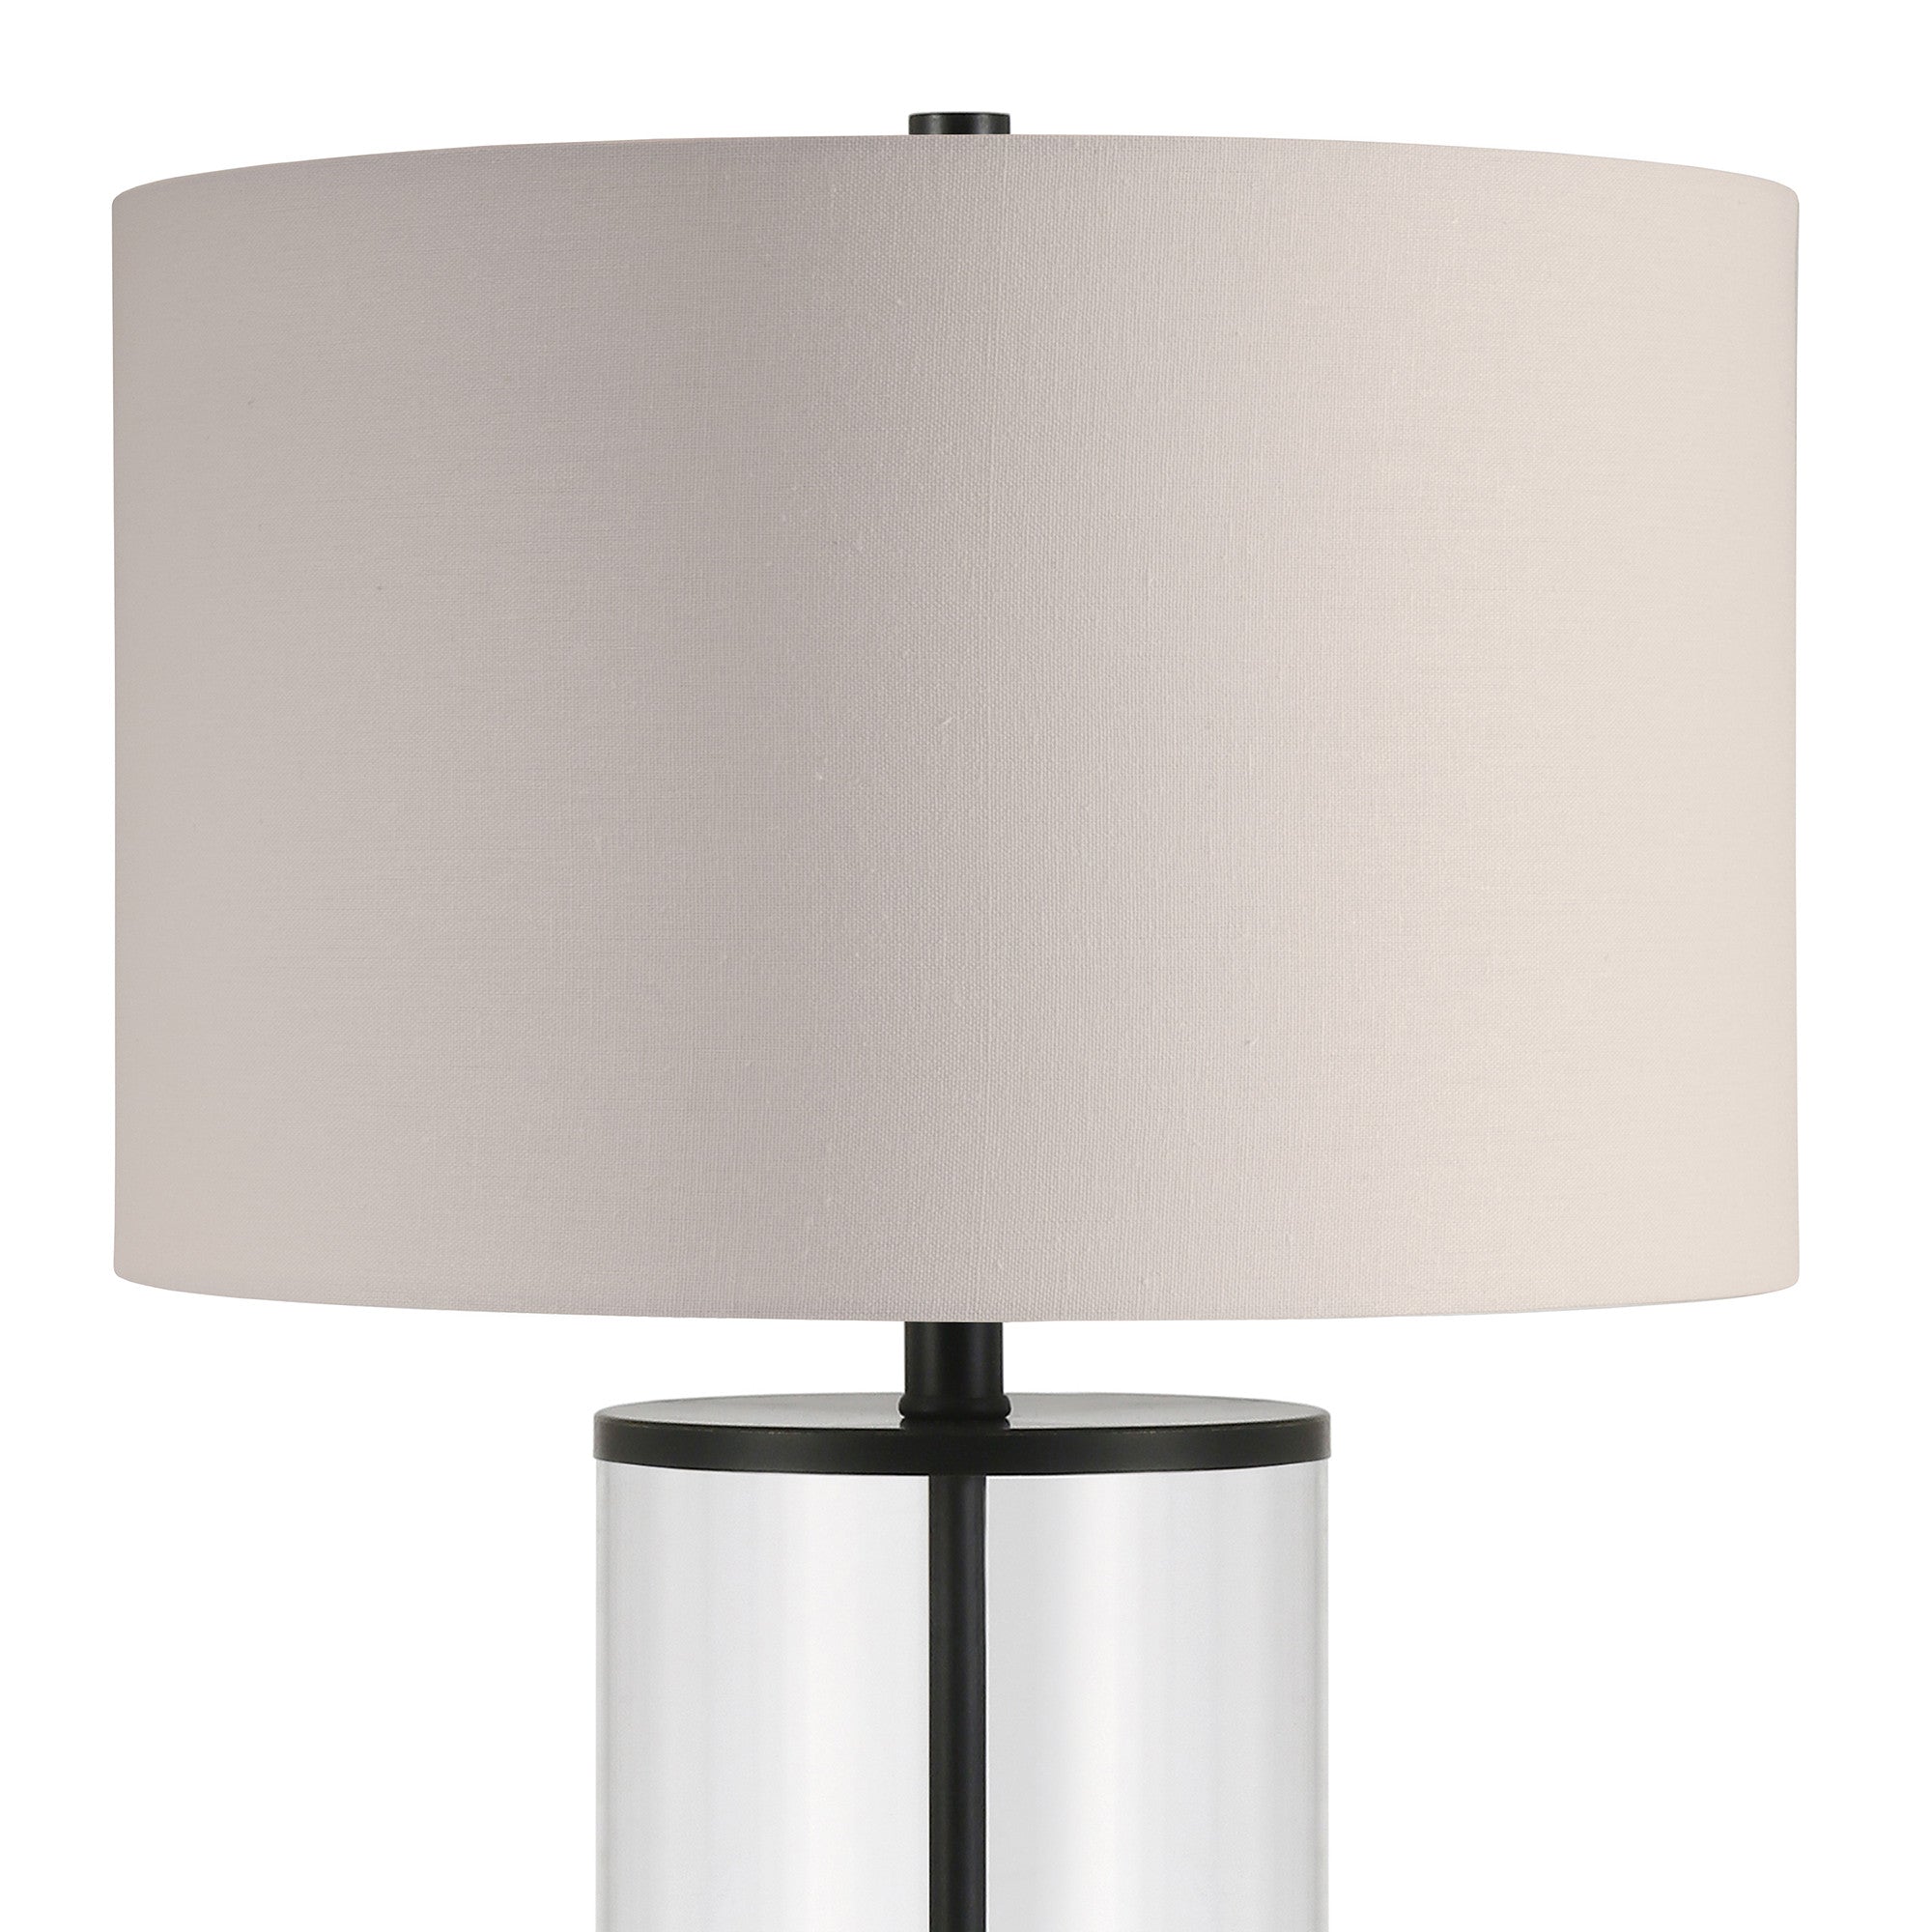 28" Black Glass Table Lamp With White Drum Shade